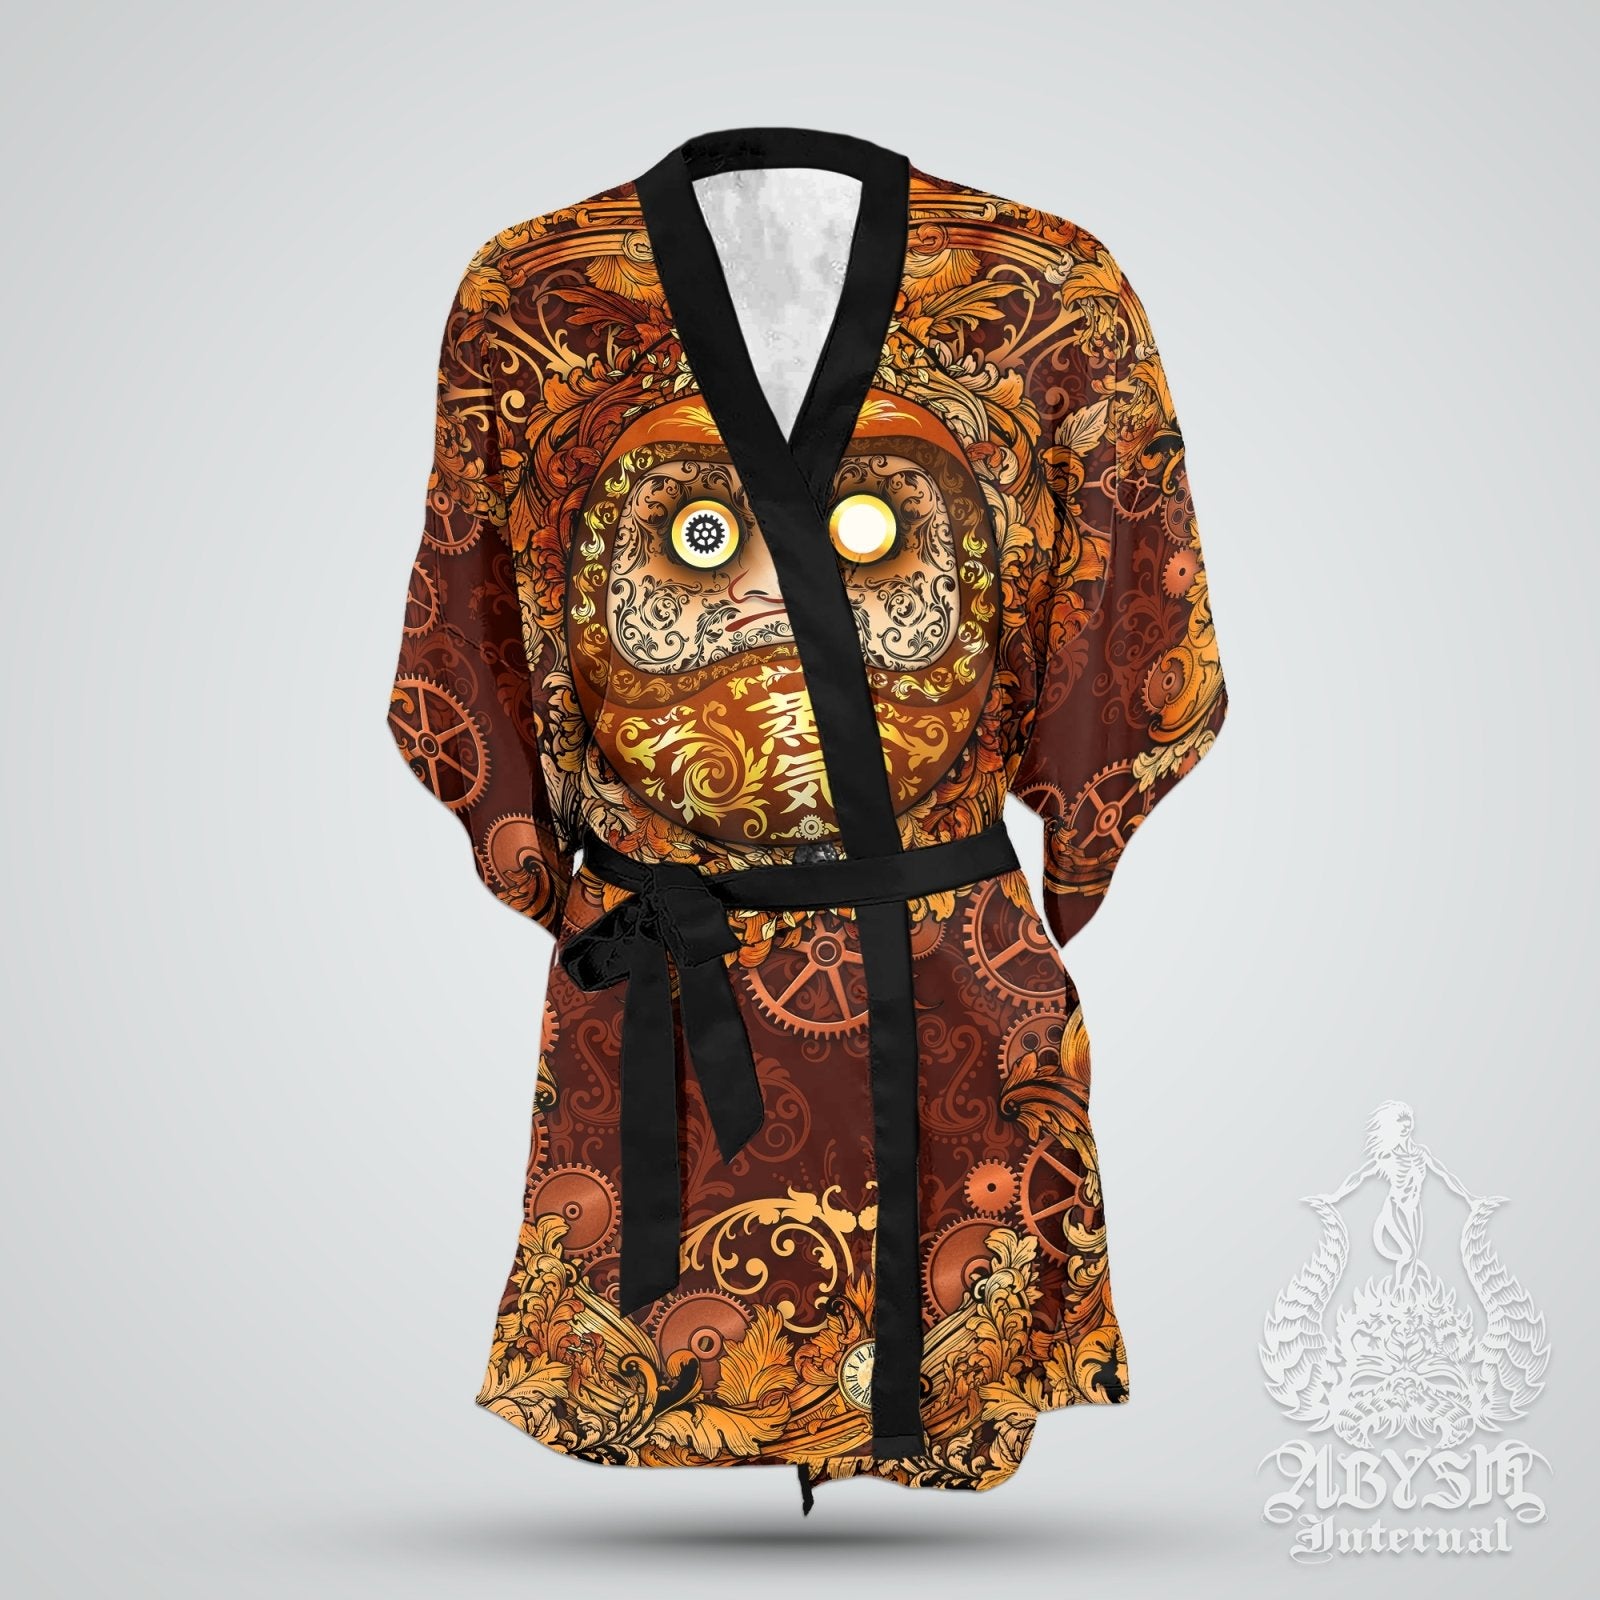 Daruma Cover Up, Beach Outfit, Party Kimono, Japanese Summer Festival Robe, Indie and Alternative Clothing, Unisex - Steampunk - Abysm Internal